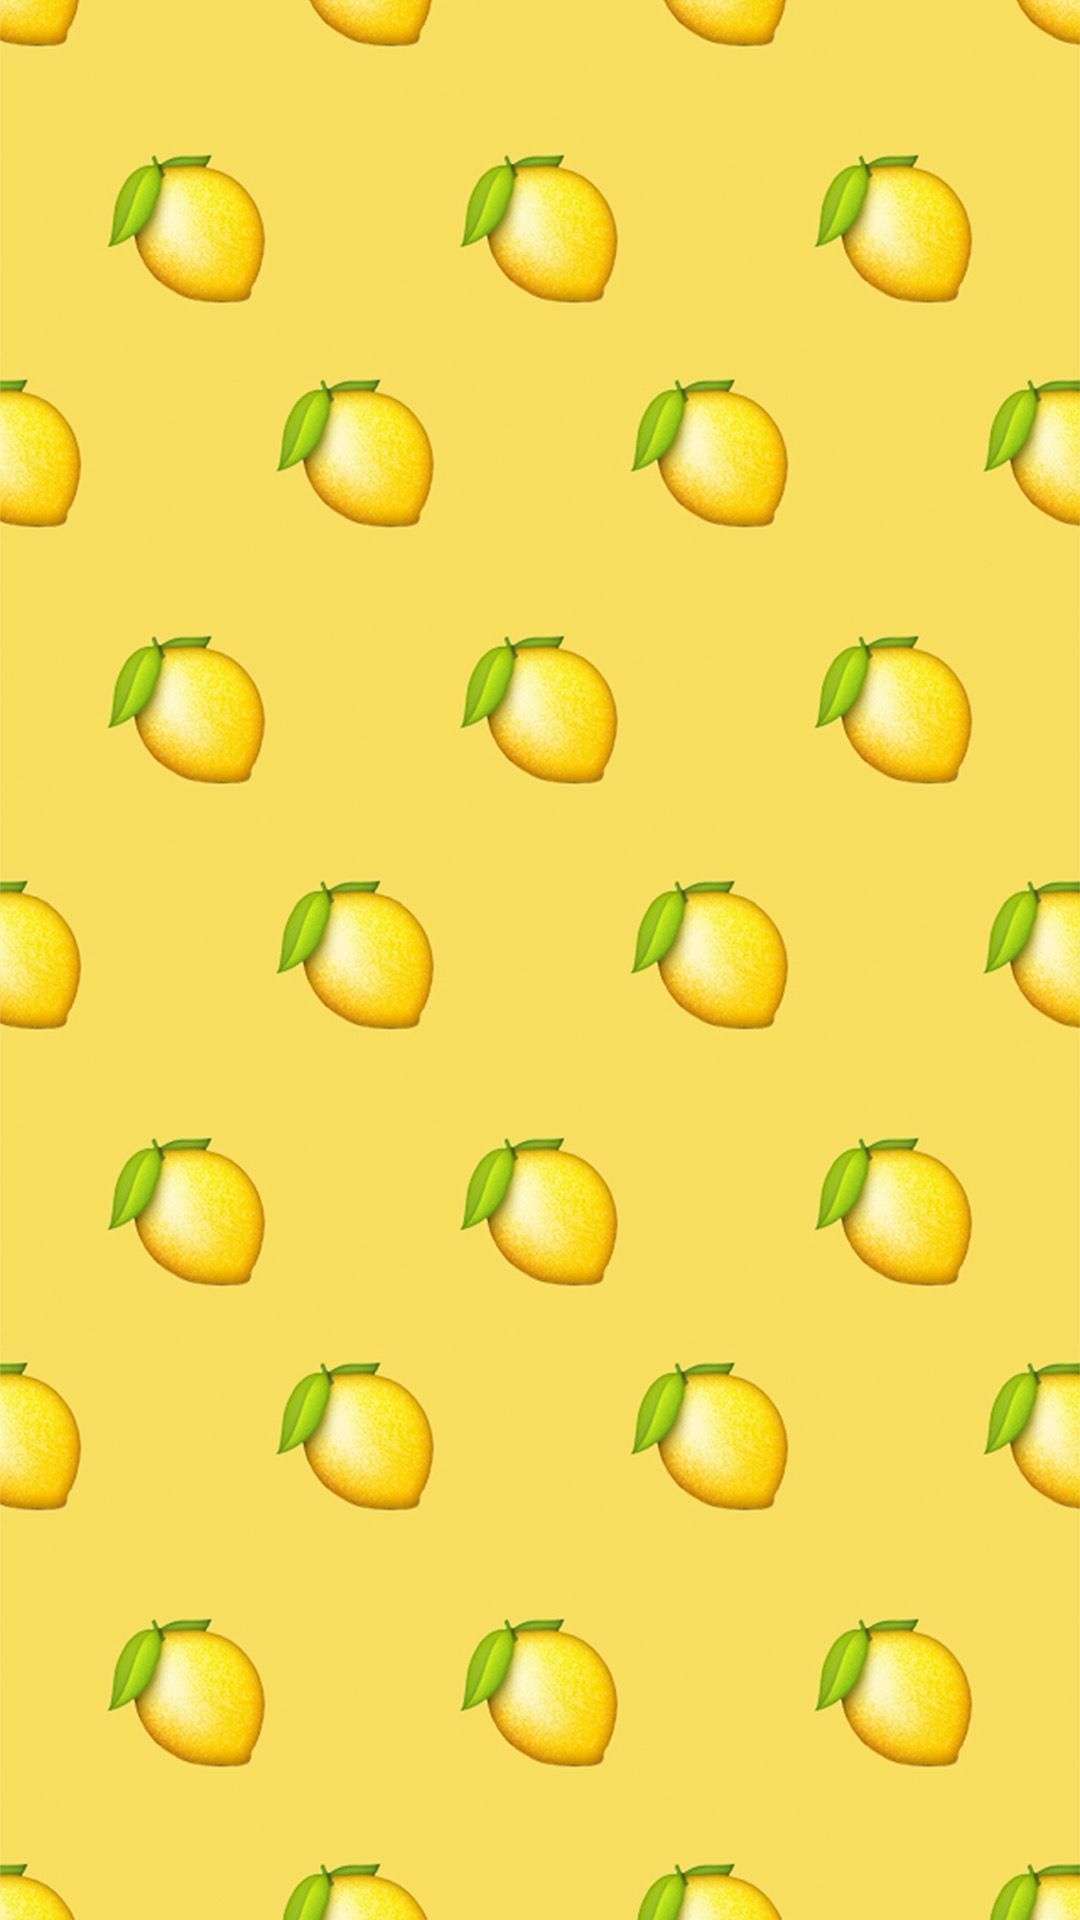 A yellow background with illustrations of lemons and leaves. - Emoji, pastel yellow, lemon